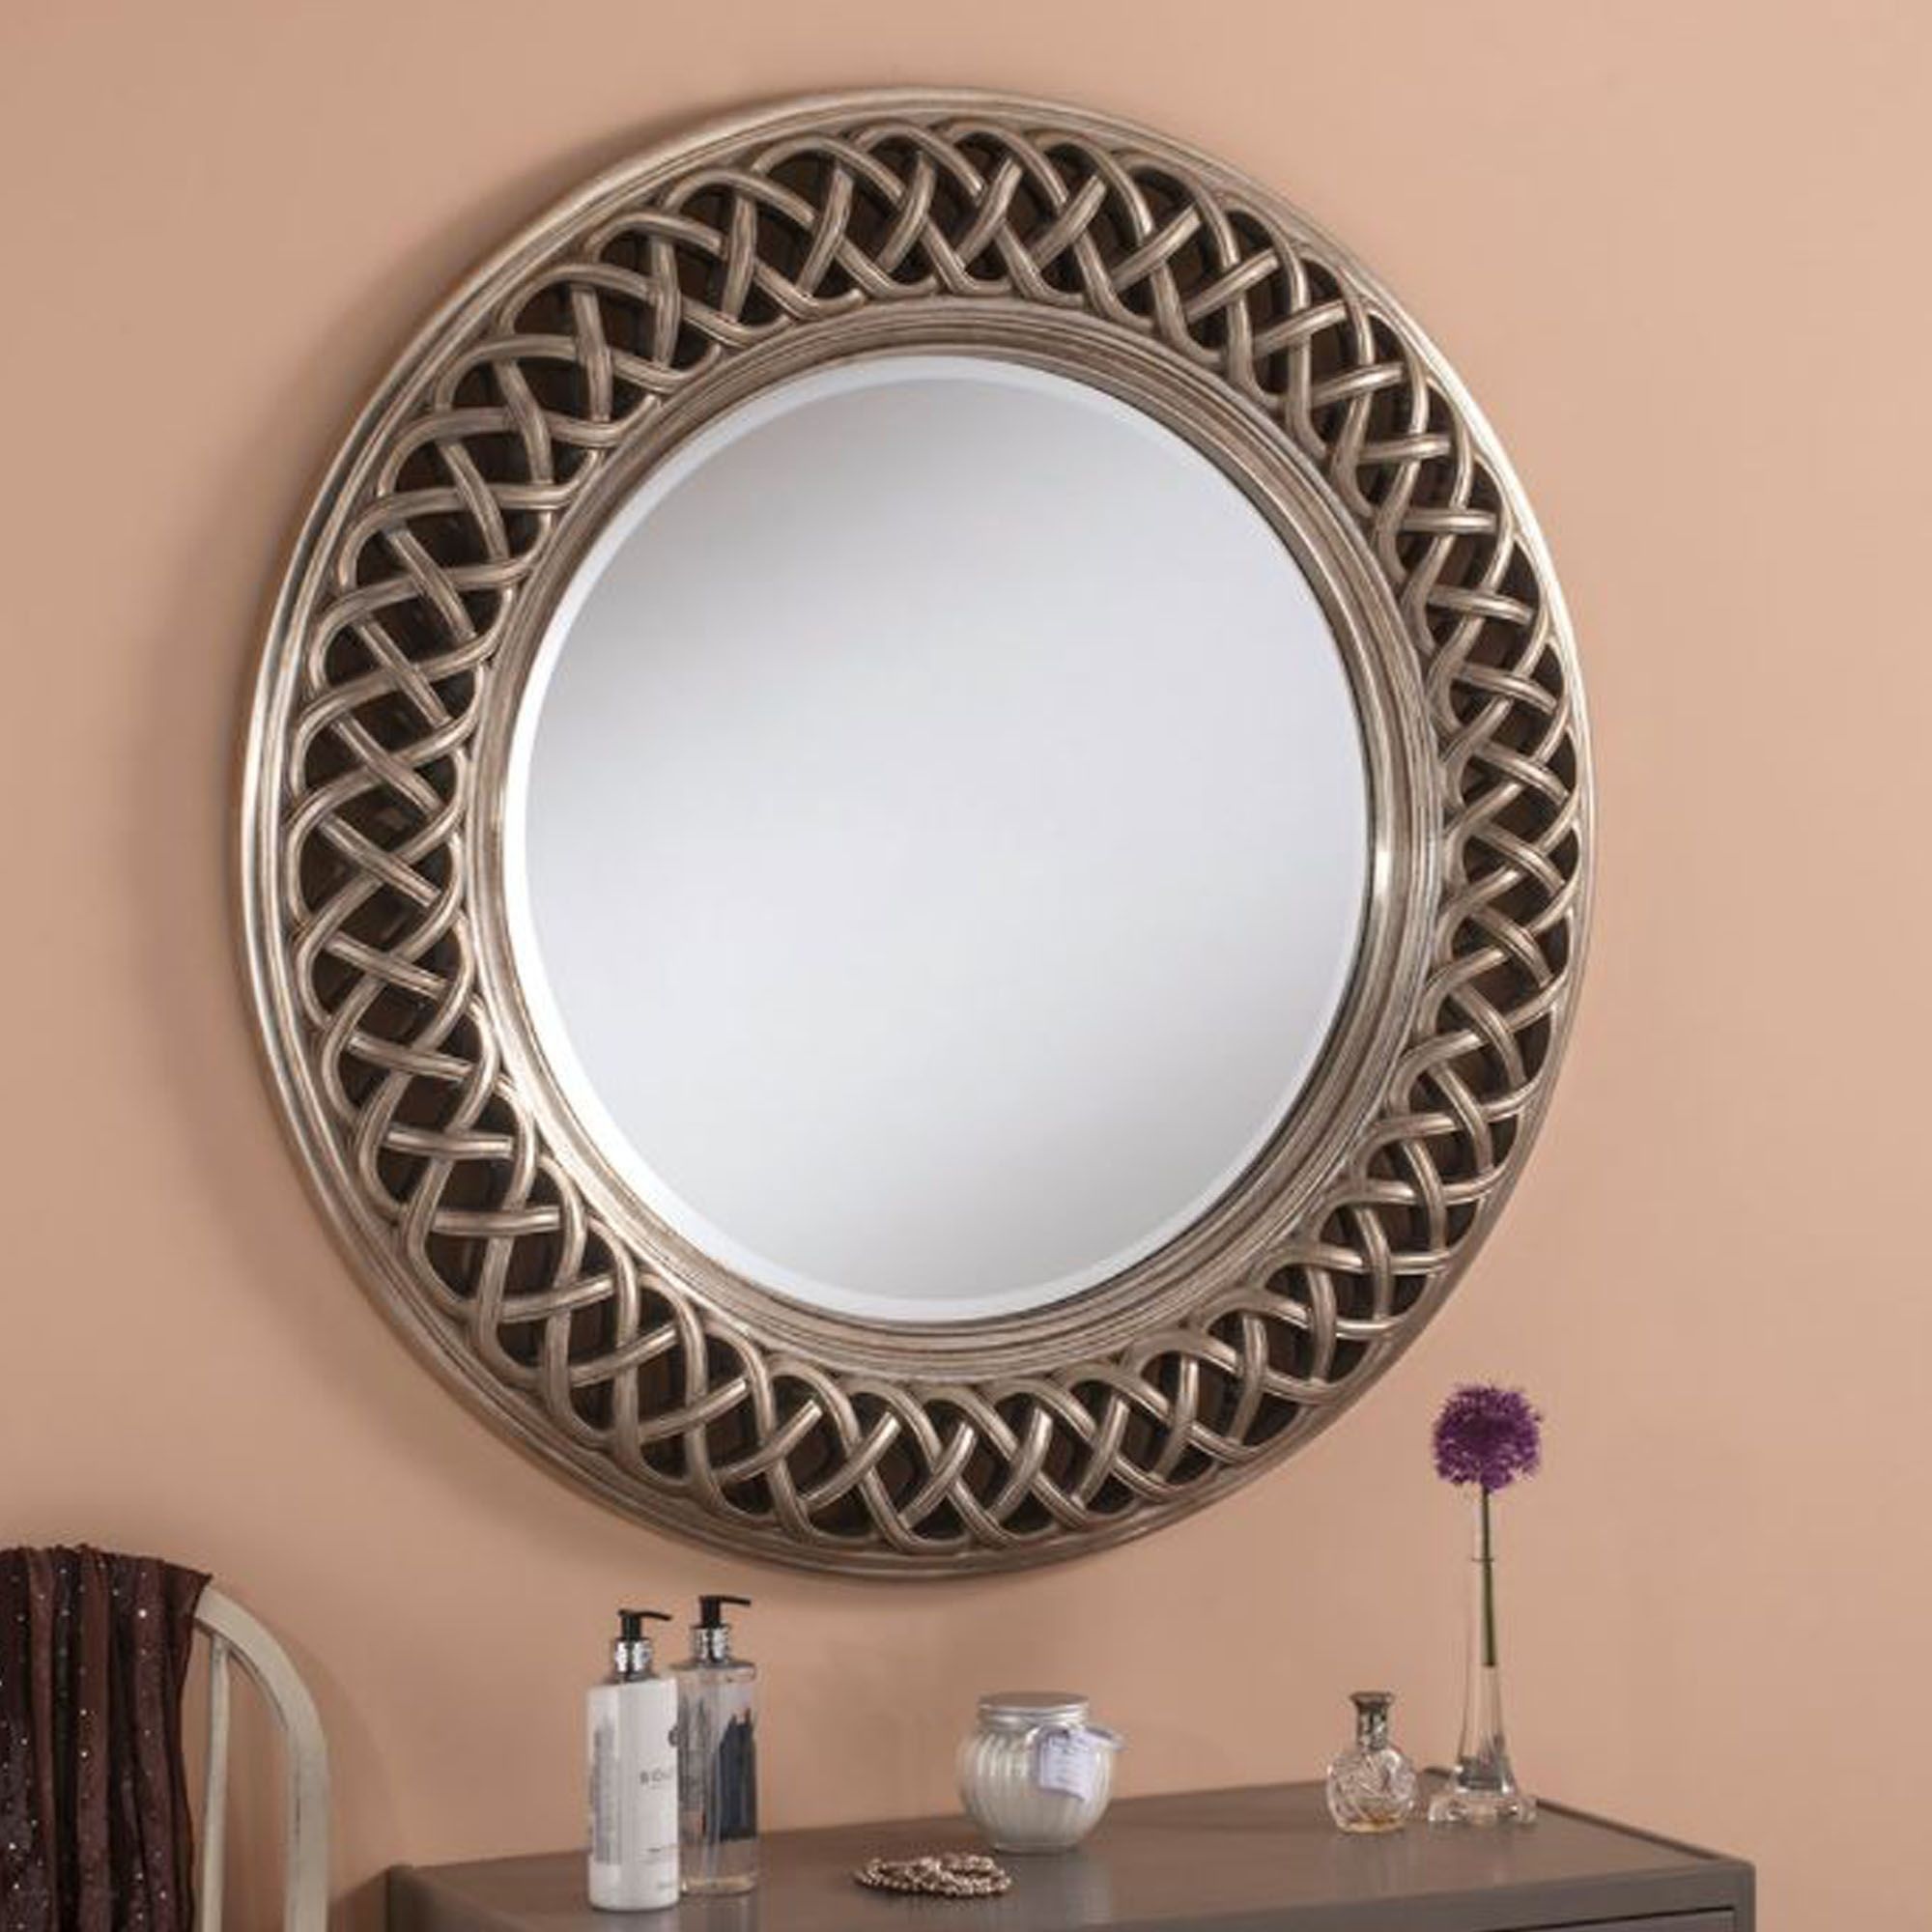 Interlocking Lace Silver Decorative Wall Mirror | Homesdirect365 With Silver Quatrefoil Wall Mirrors (View 12 of 15)